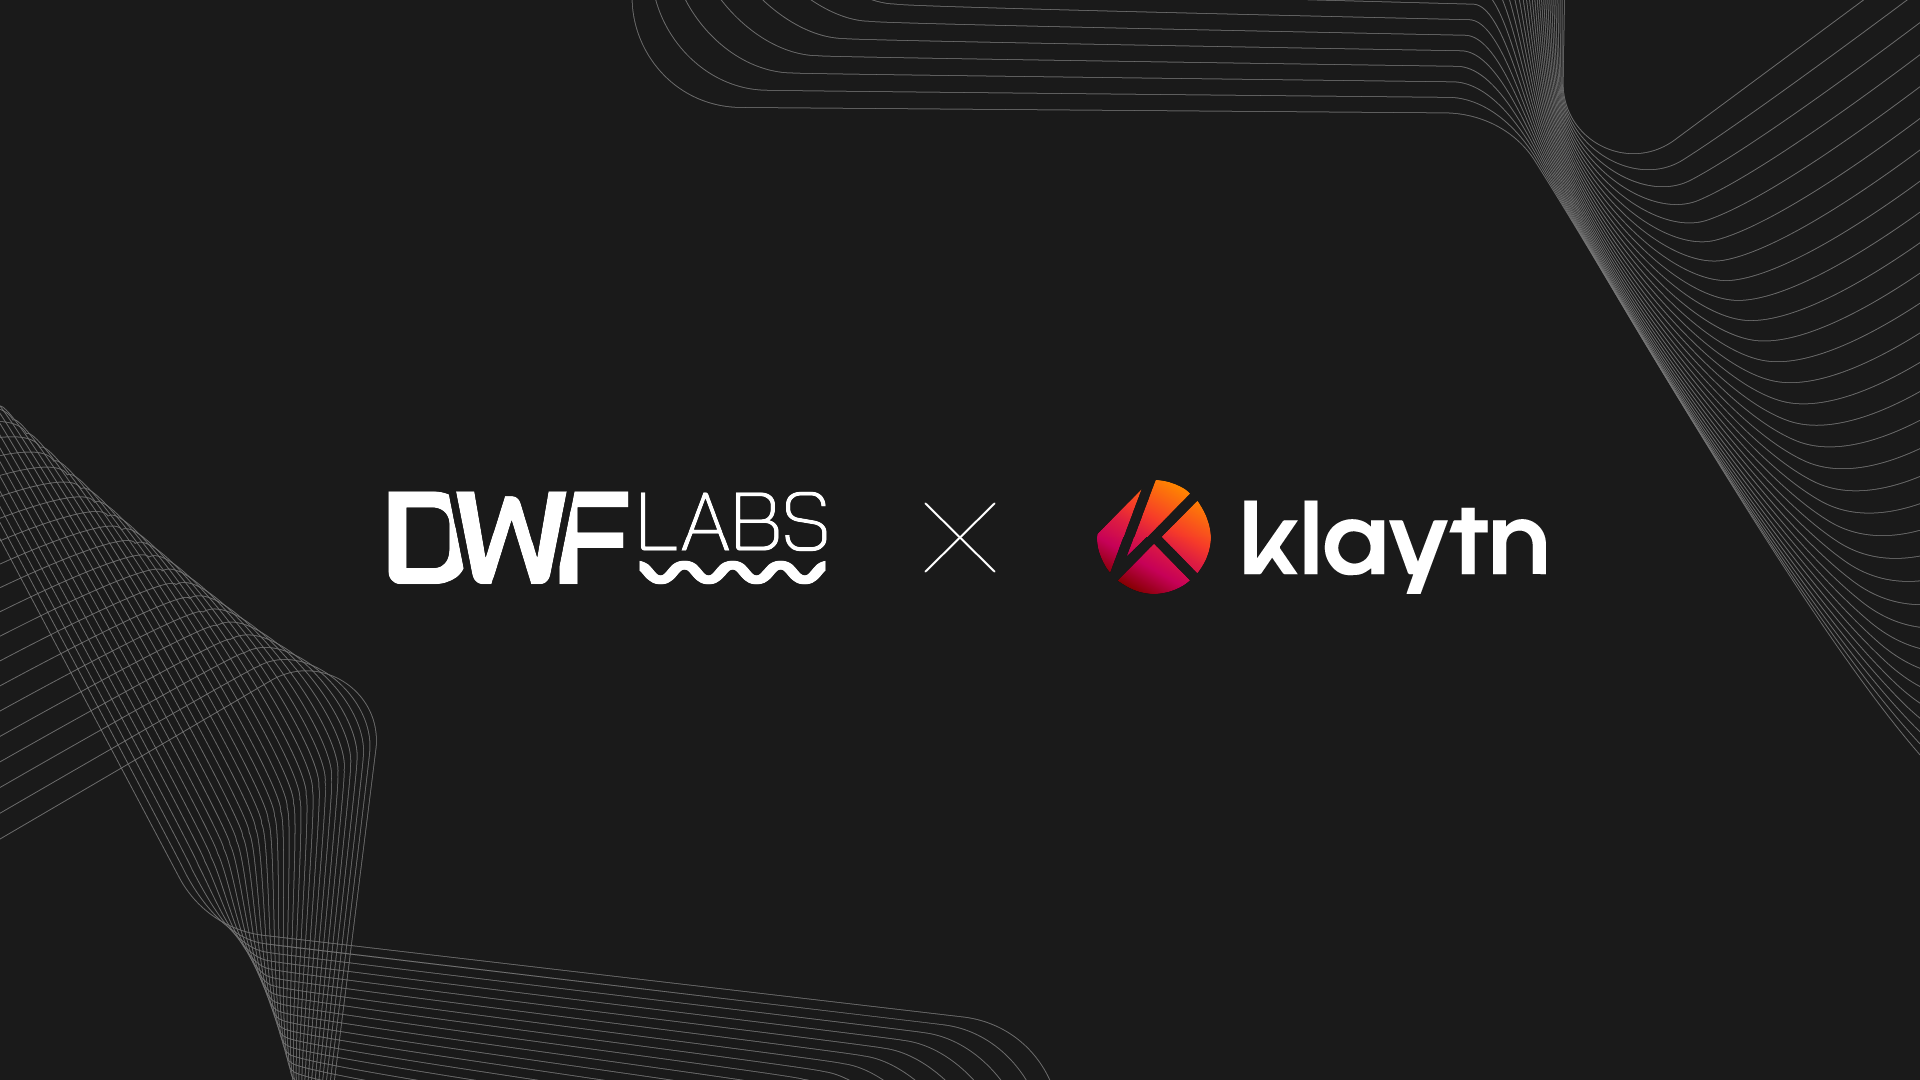 DWF Labs joins the Klaytn Governance Council horizontal banner with DWF Labs horizontal logo light theme and Klaytn logo light theme dimensions 1920x1080